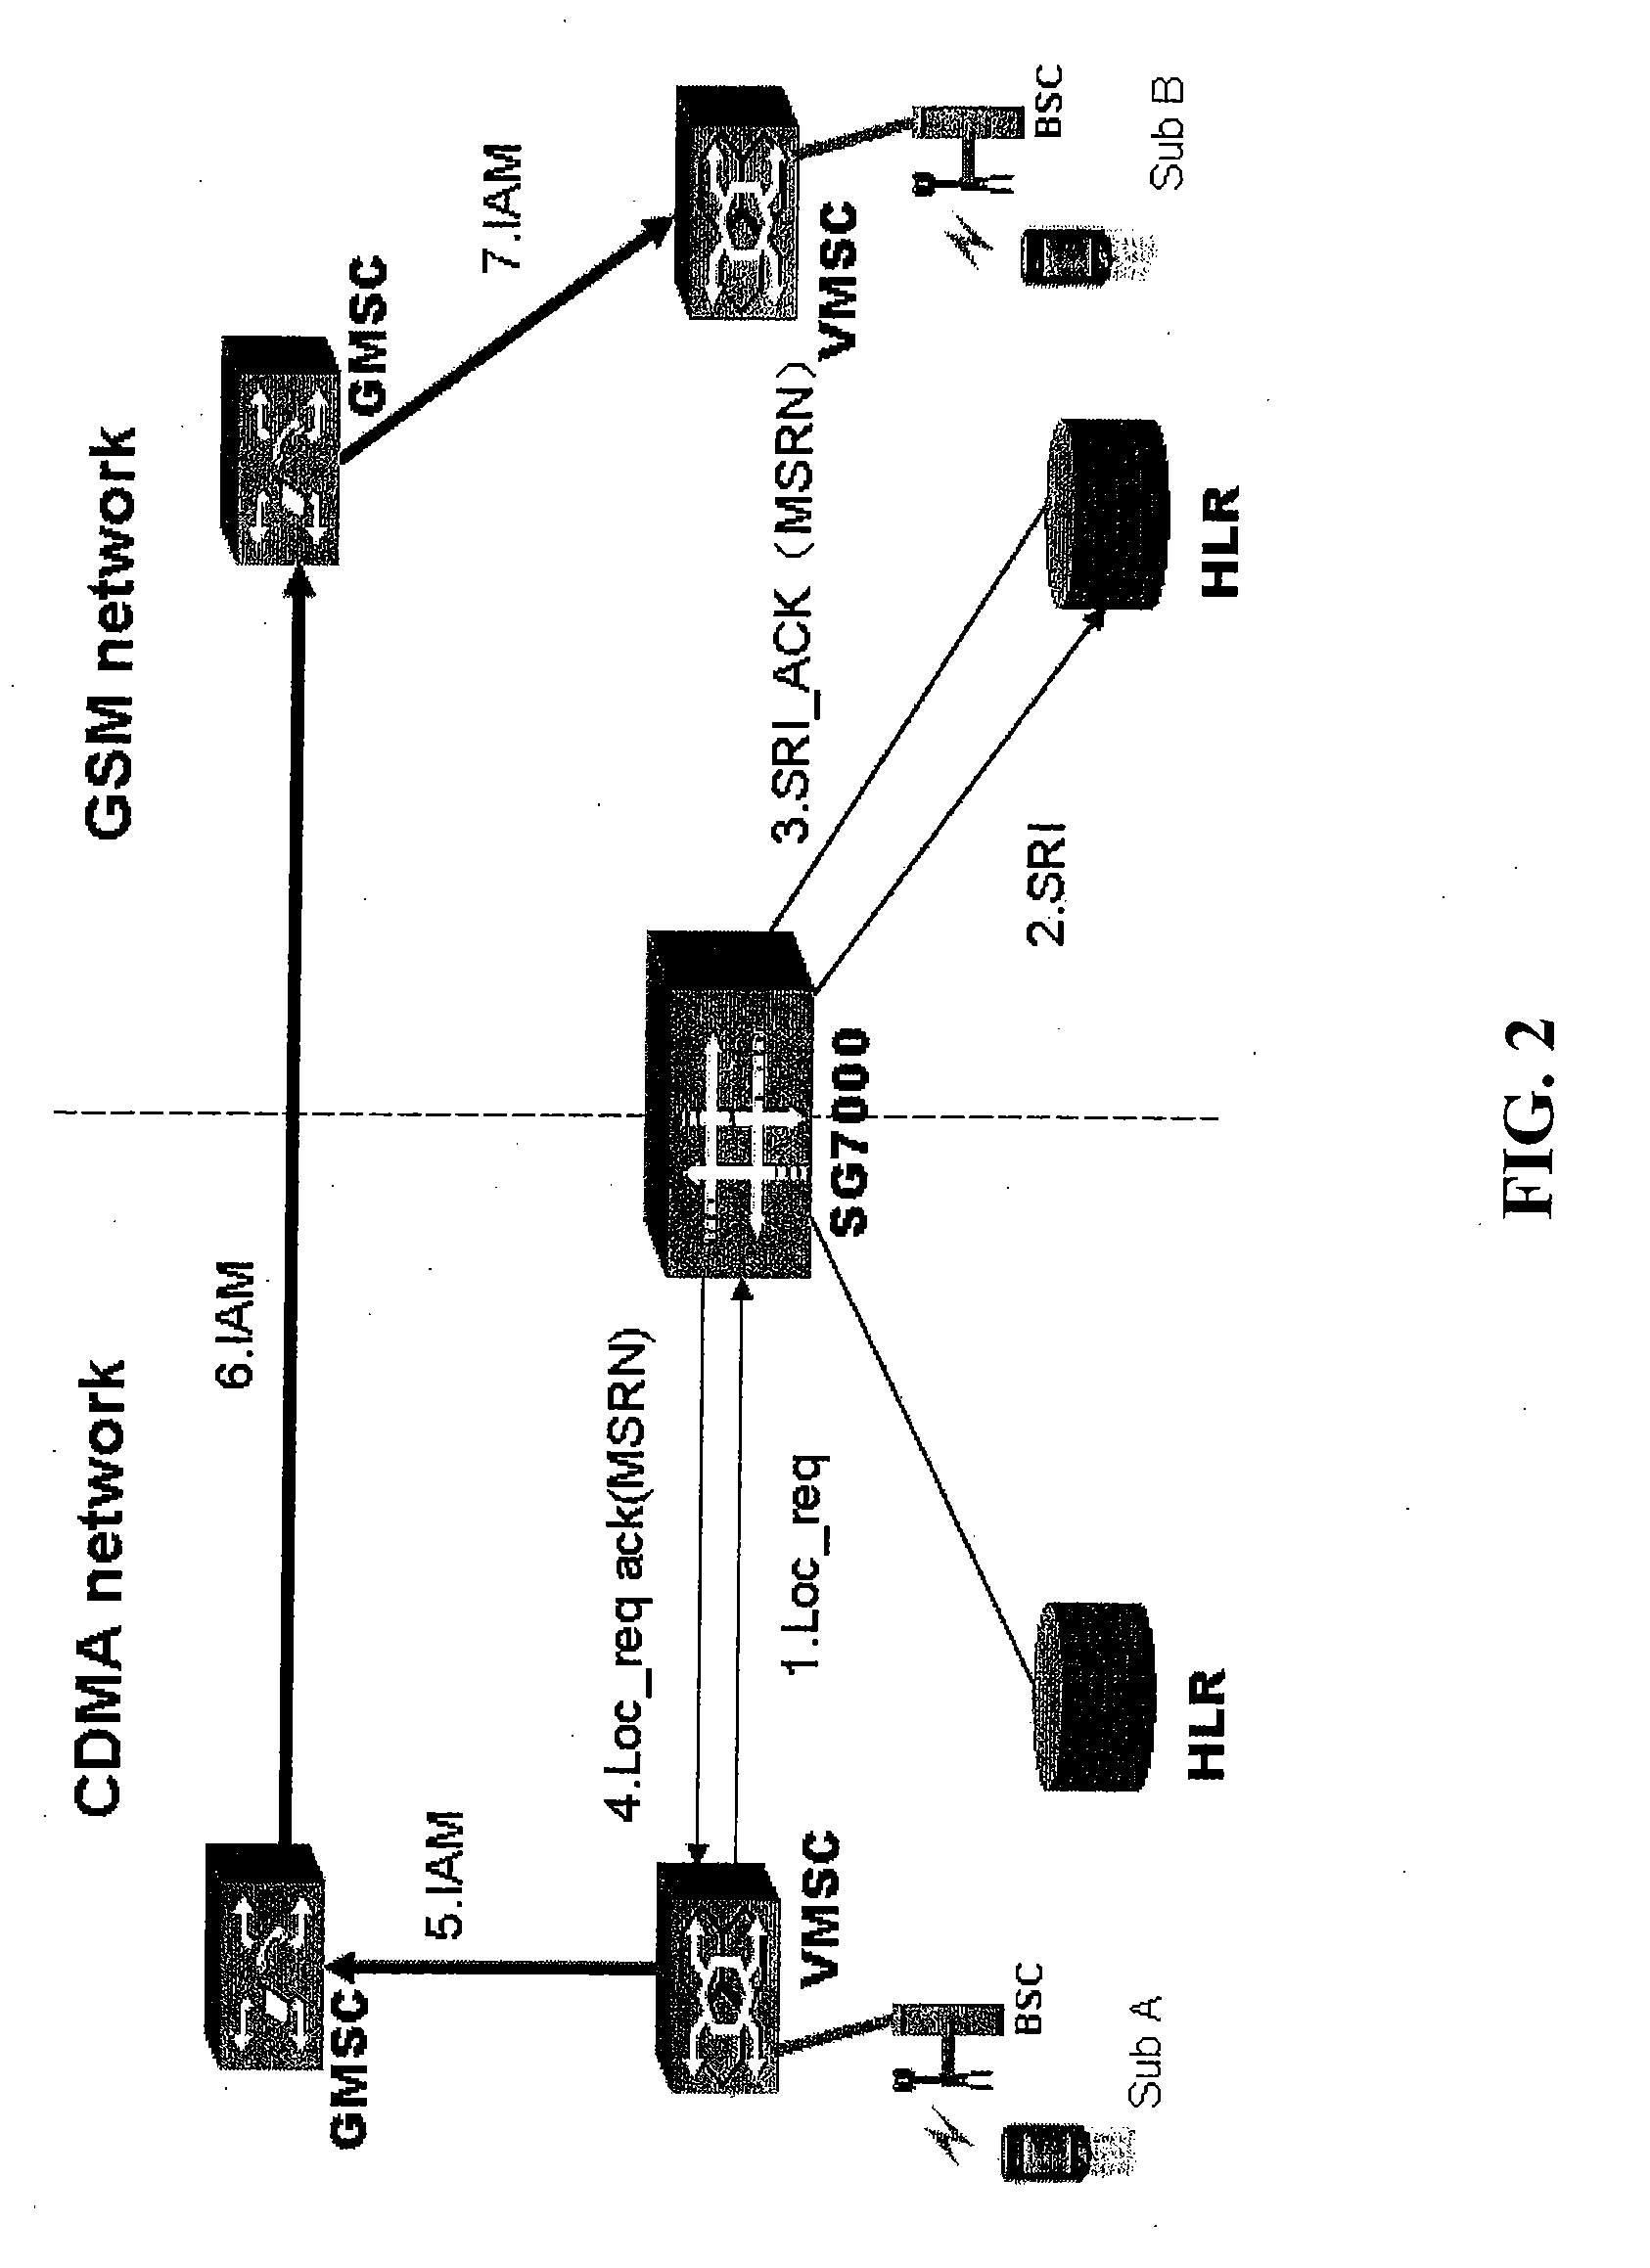 Method and system for inter-network mobile number portability